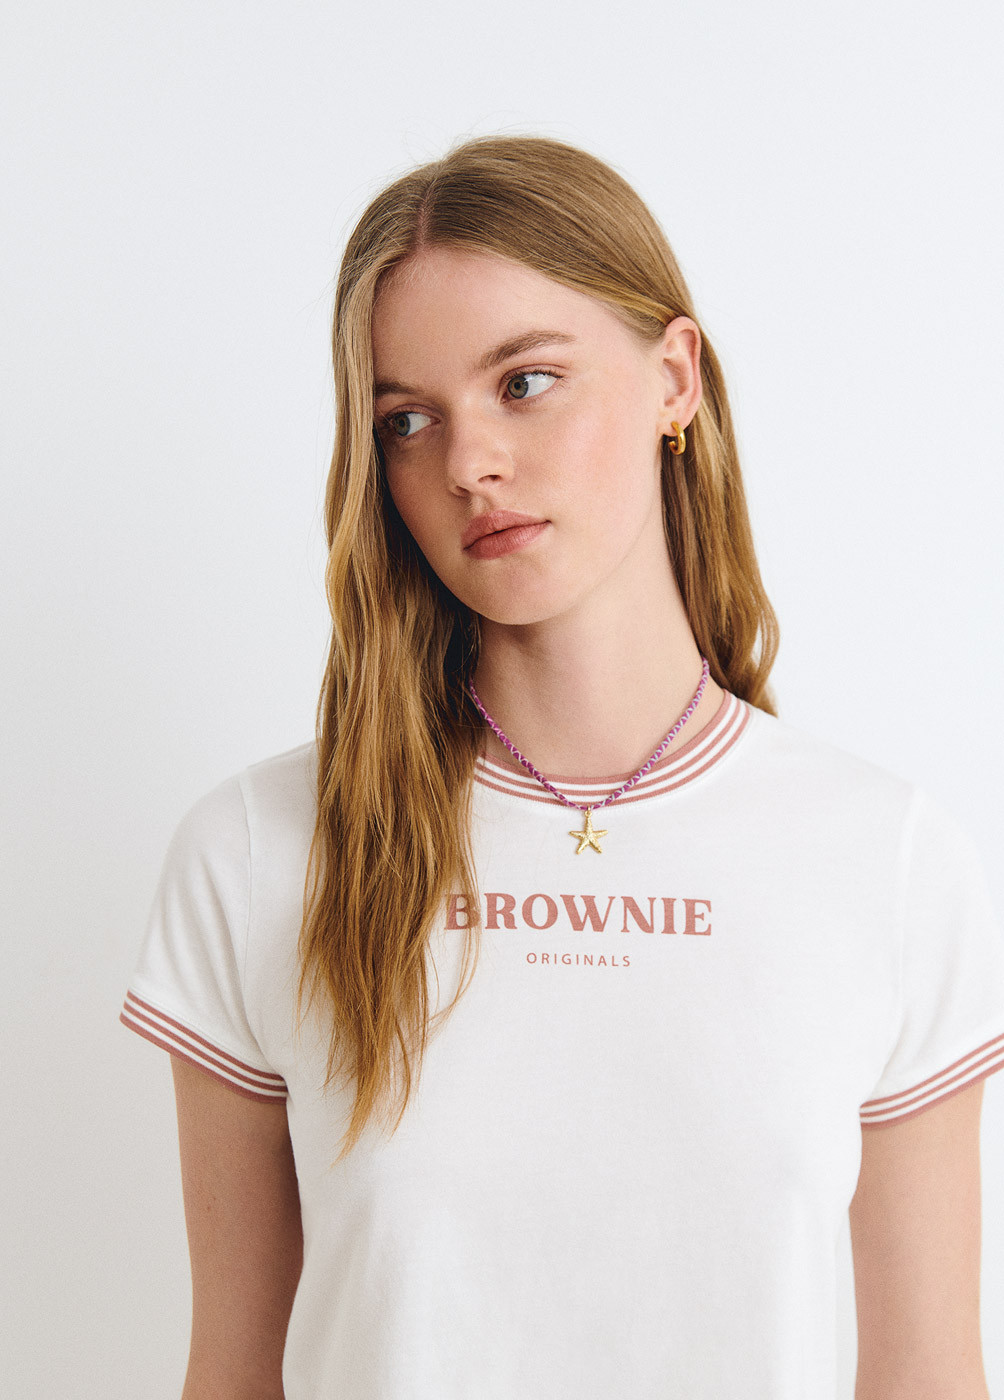 Contrast brownie text t-shirt